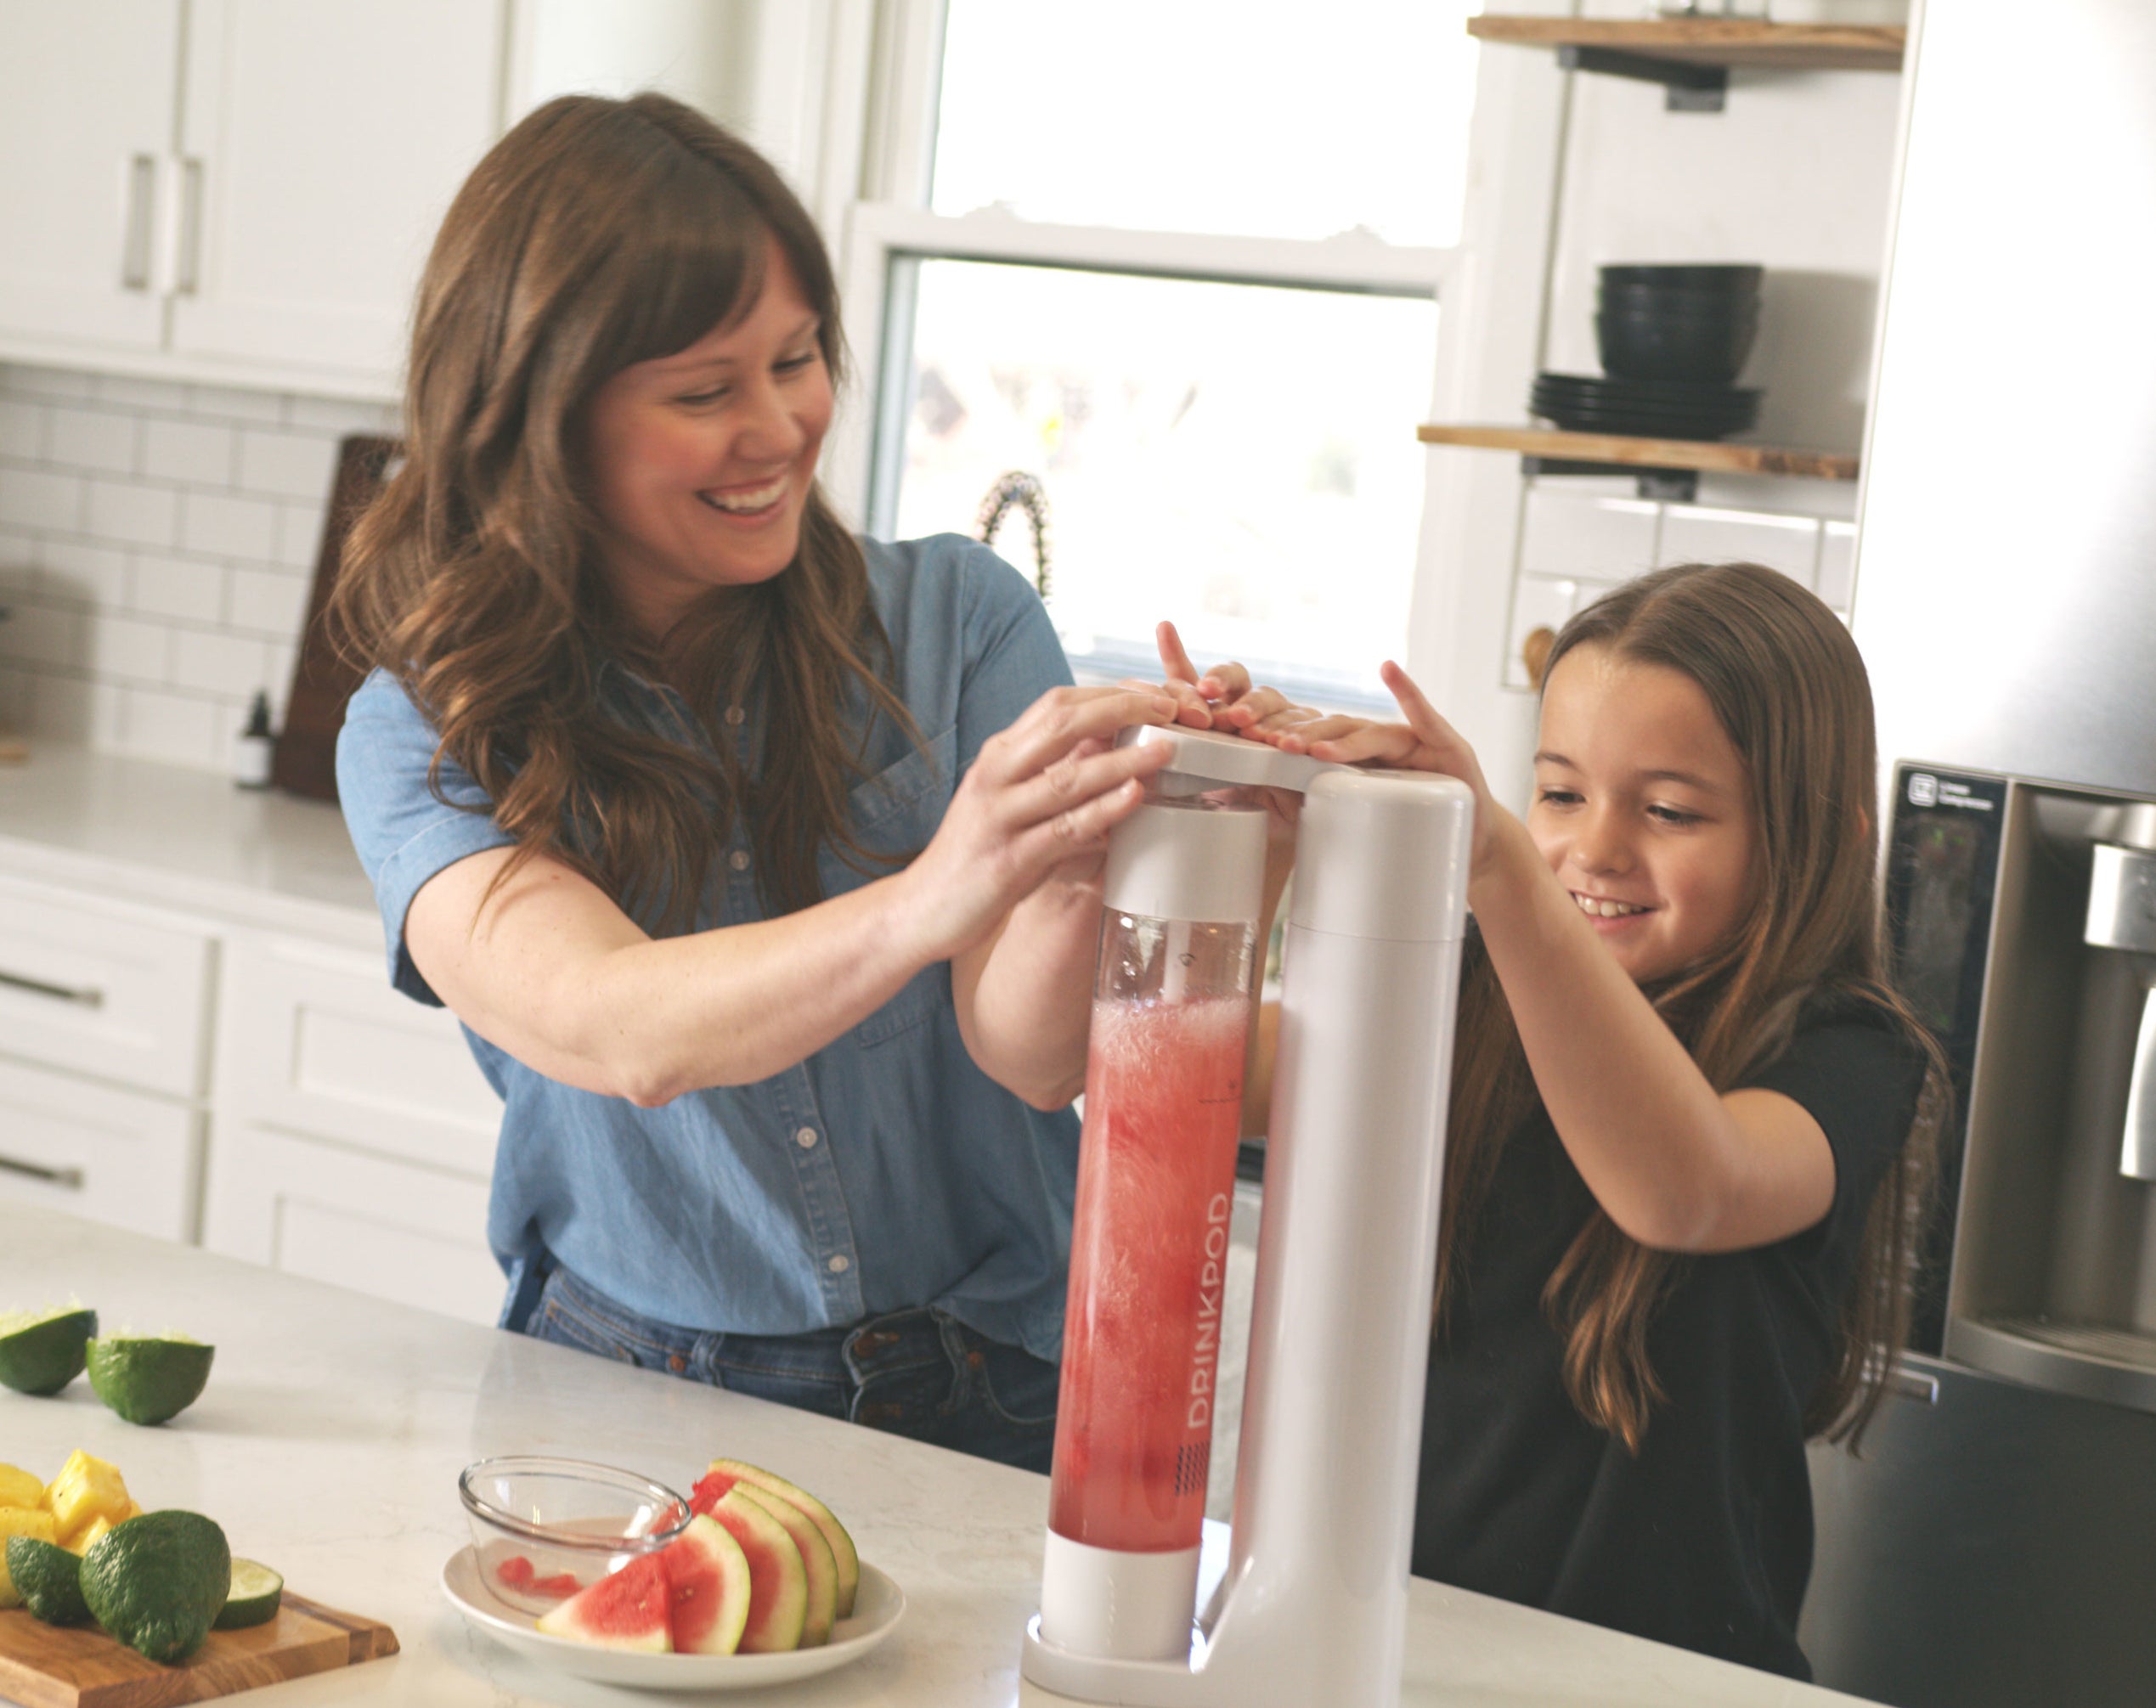 A parent and child operating the fizzy drink machine